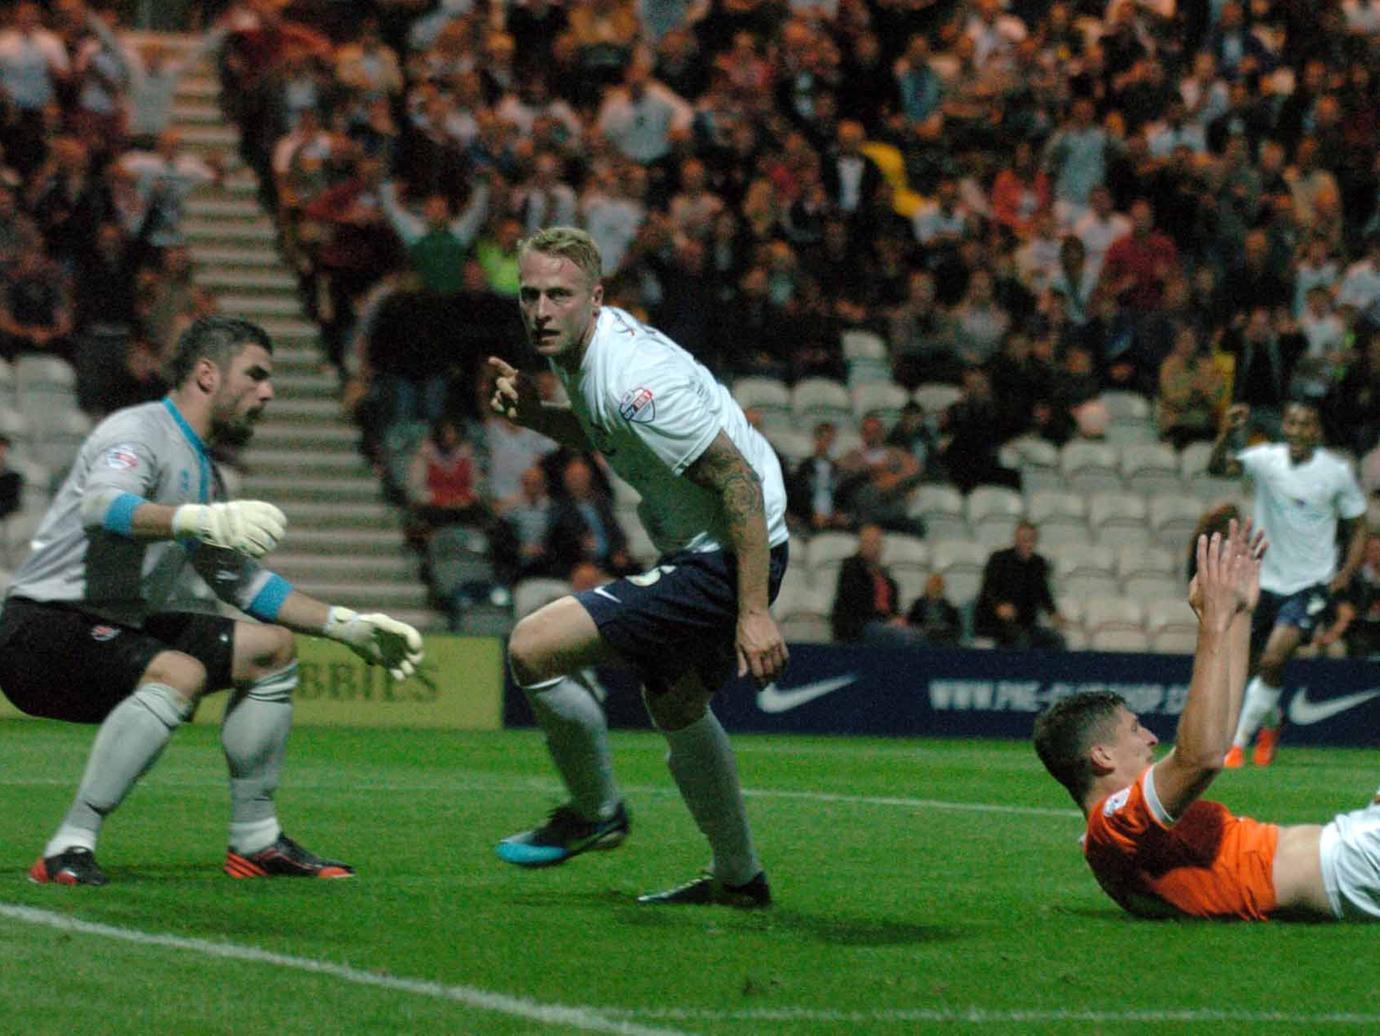 Not only did he put the ball in the Blackpool net, but Tom Clarke has been a real leader of men since arriving at the club. A warrior, he's played over 200 times in six years and captained PNE to promotion at Wembley.